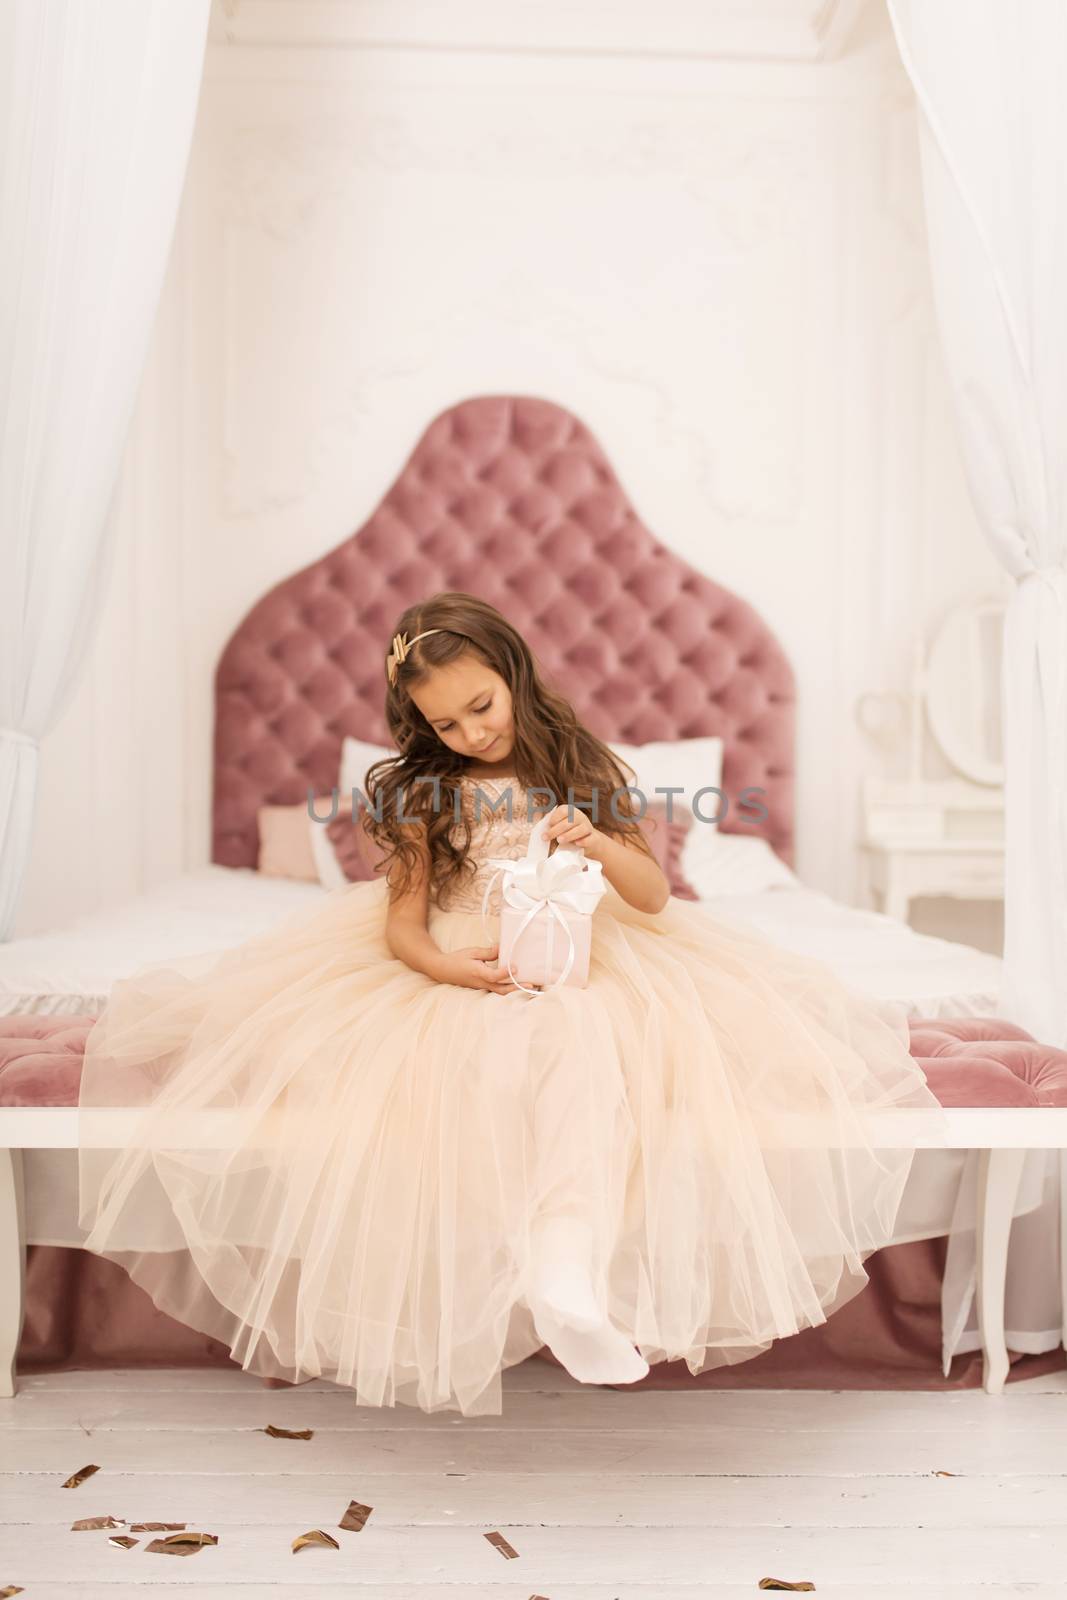 Happy childhood, magical Christmas tale. Little princess with Santa's present for Christmas.